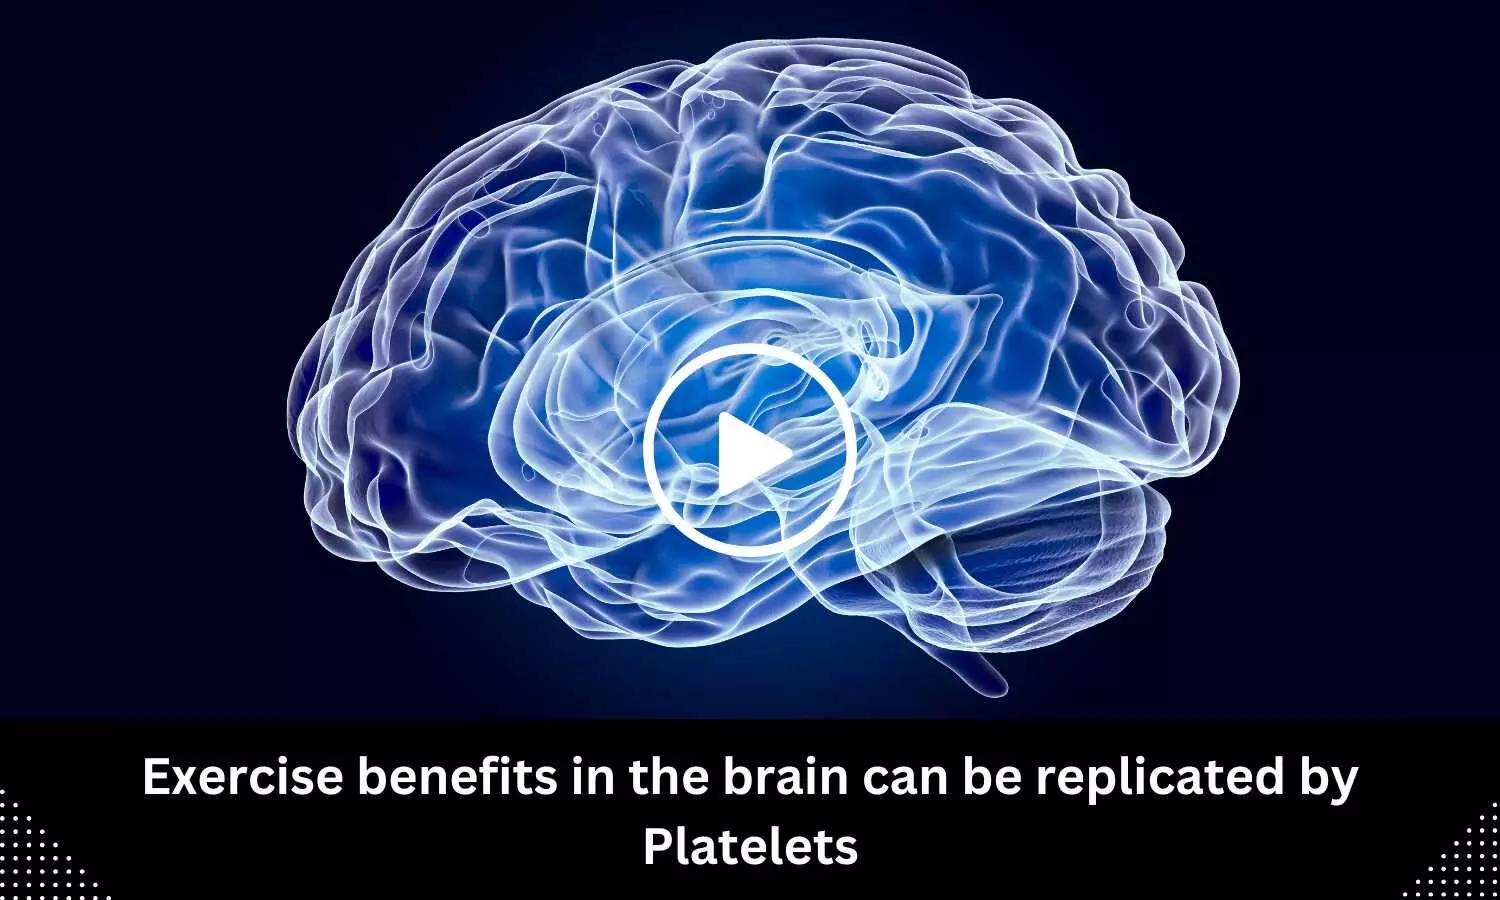 Exercise benefits in the brain can be replicated by Platelets